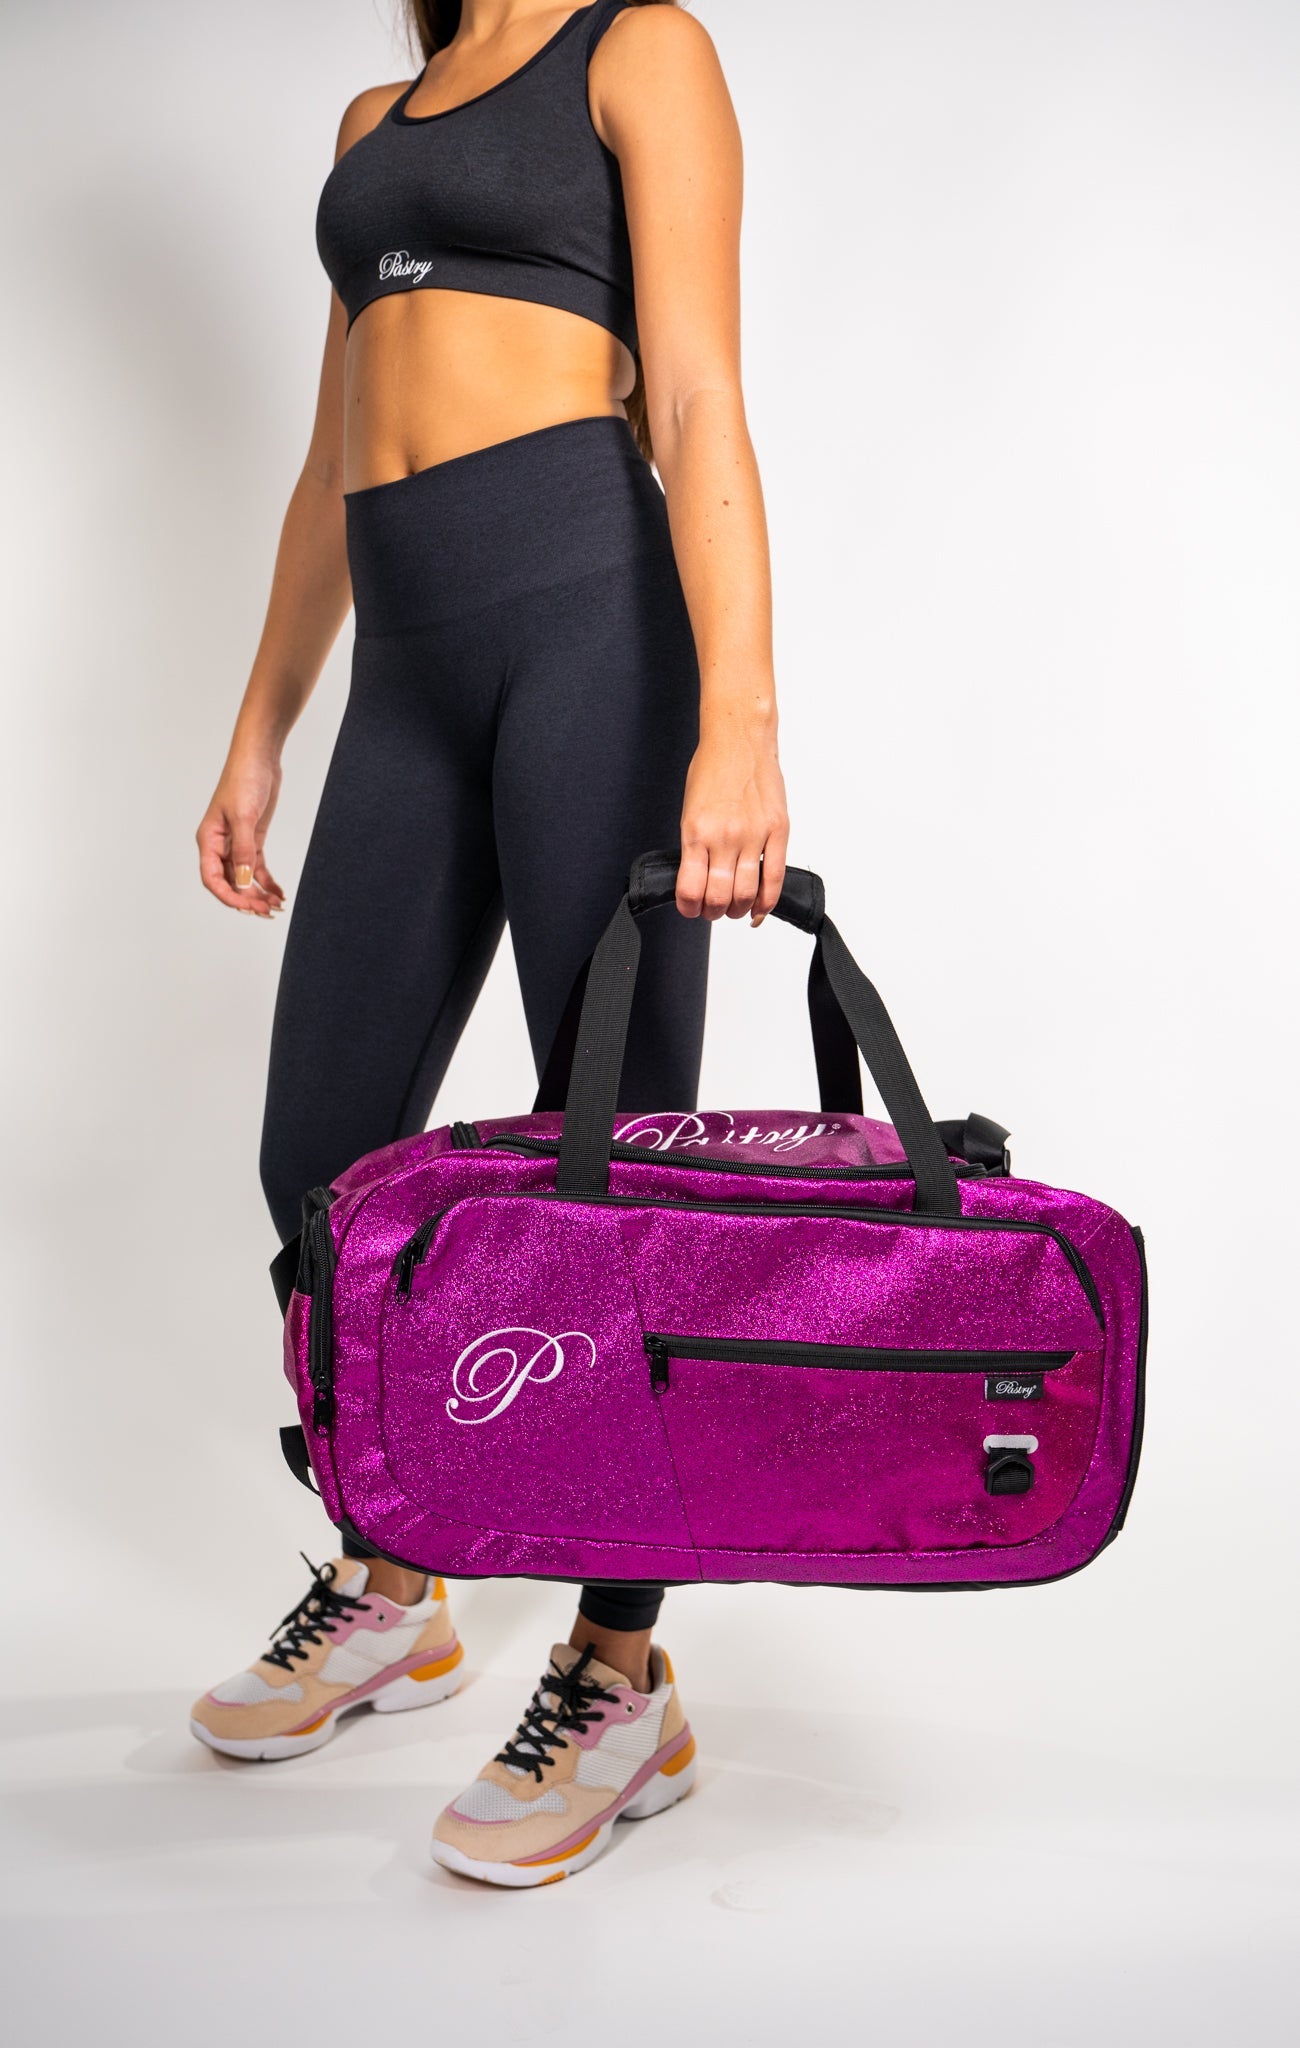 Woman carrying Pastry Duffle Bag Glitter Hot Pink